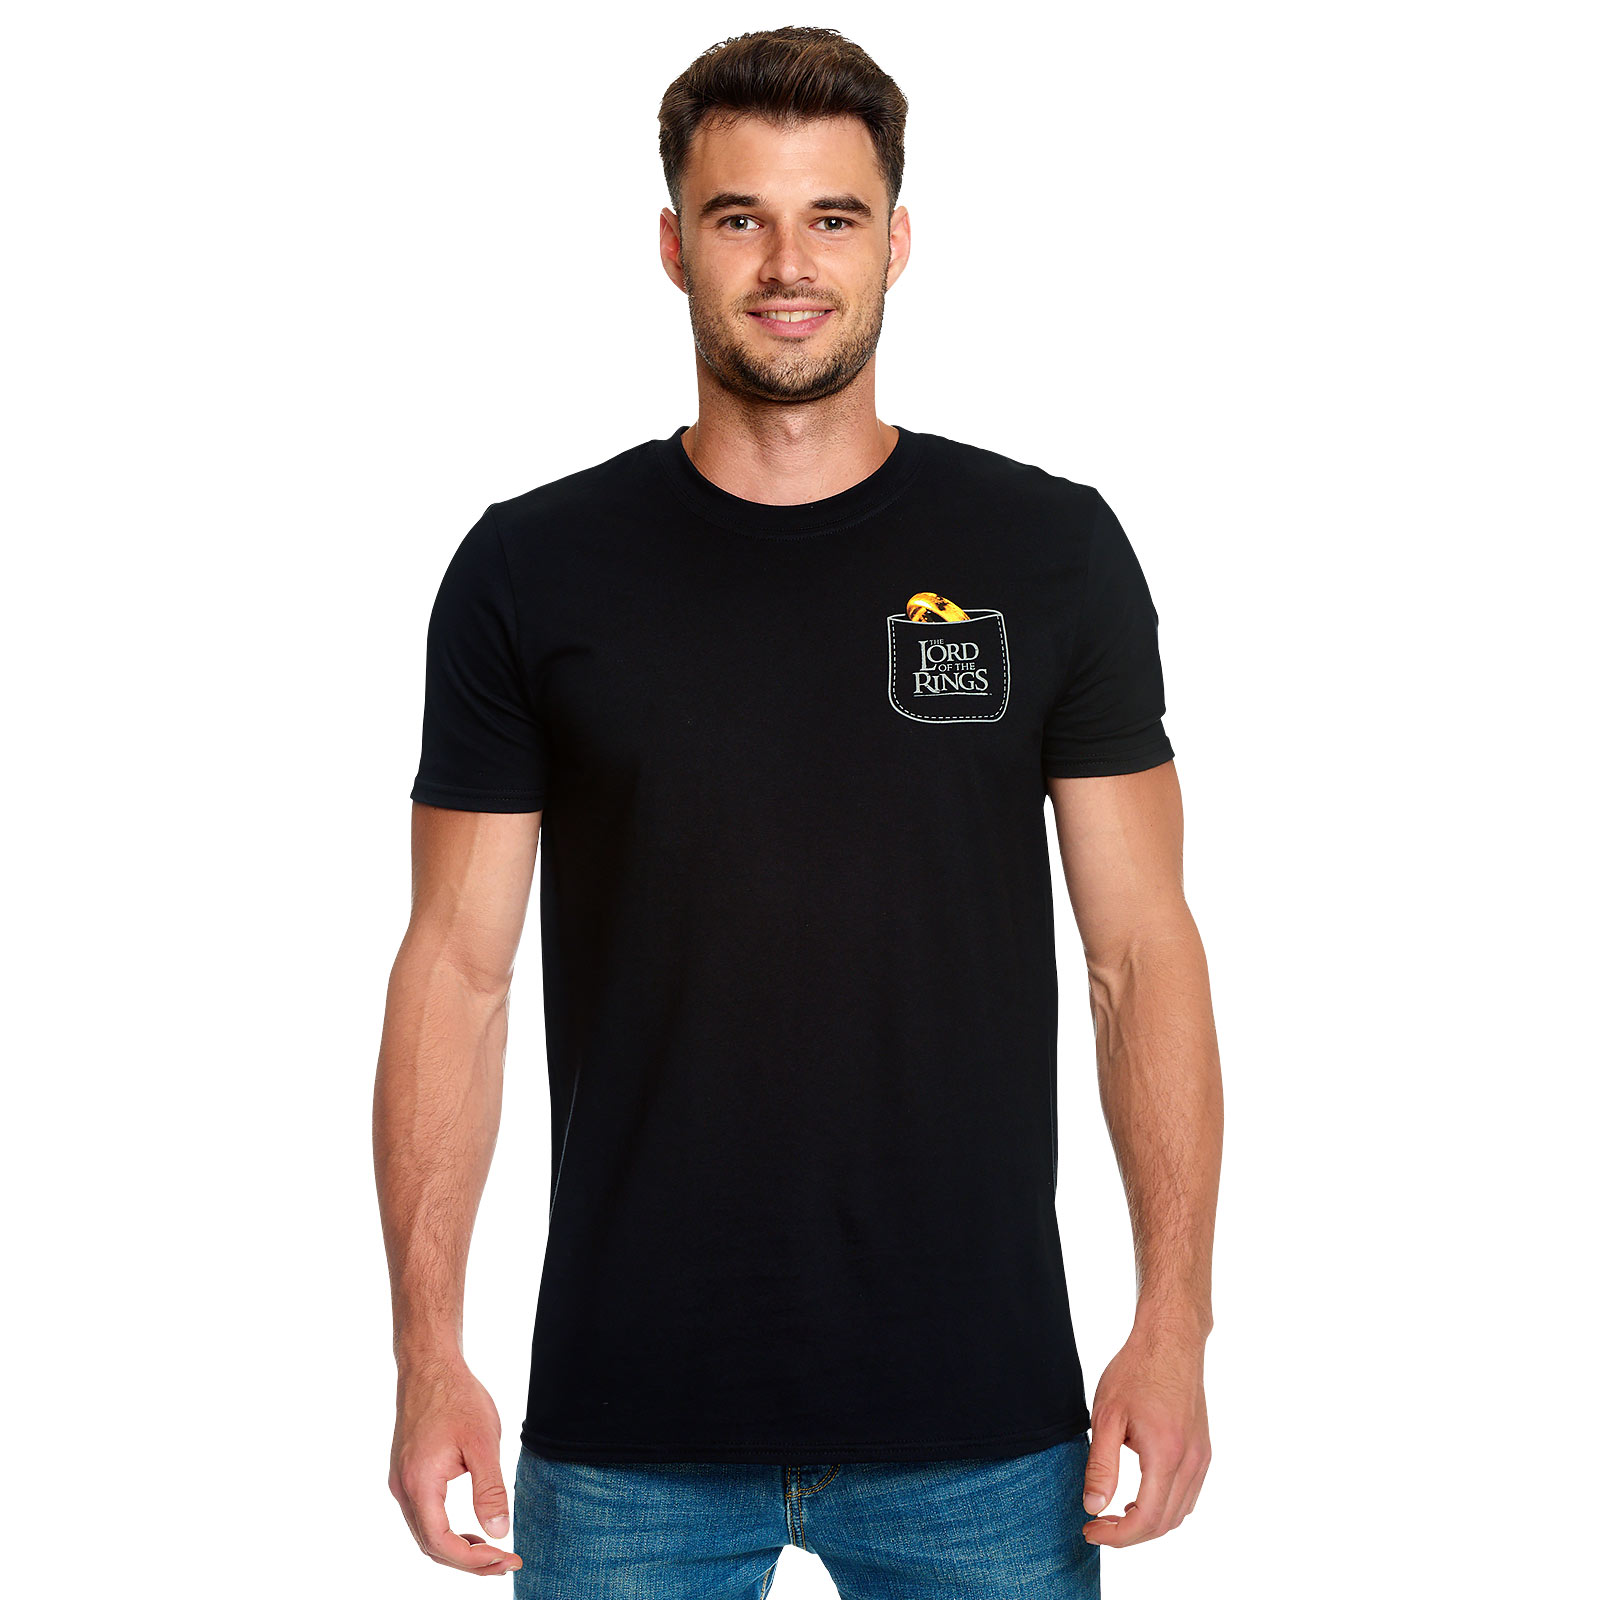 Lord of the Rings - The One Ring Pocket T-Shirt Black